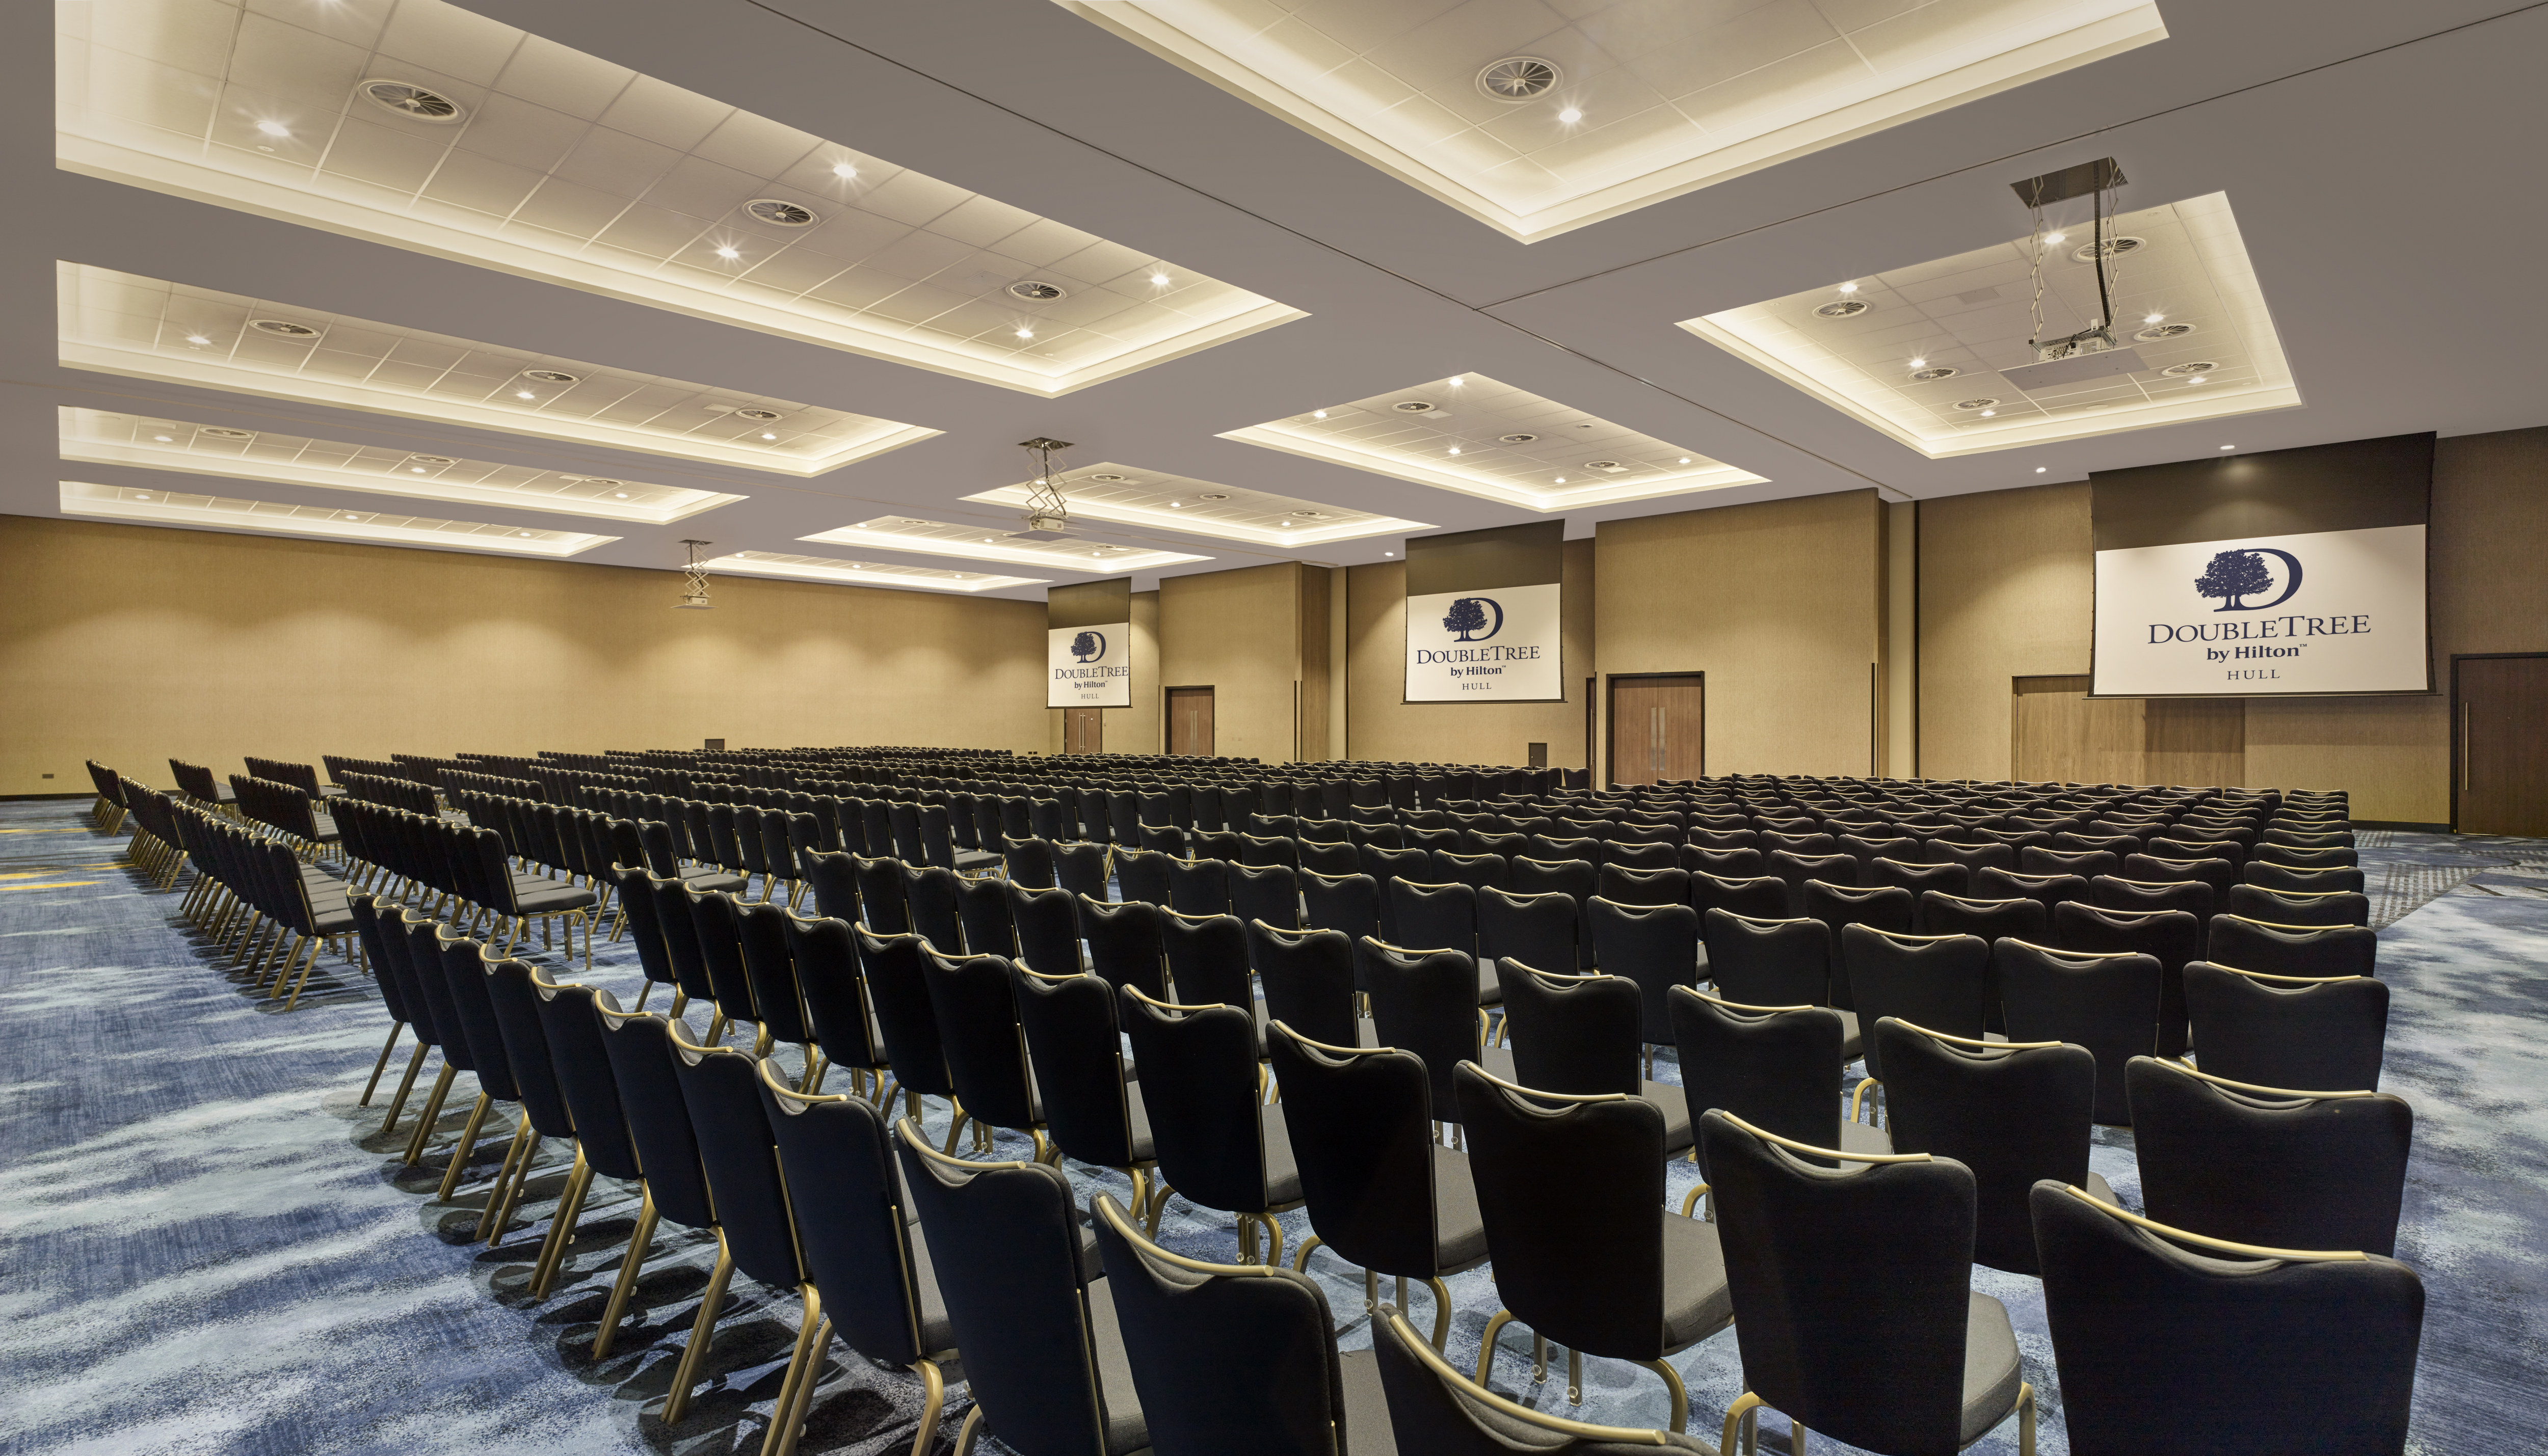 conference setup in ballroom with rows of chairs